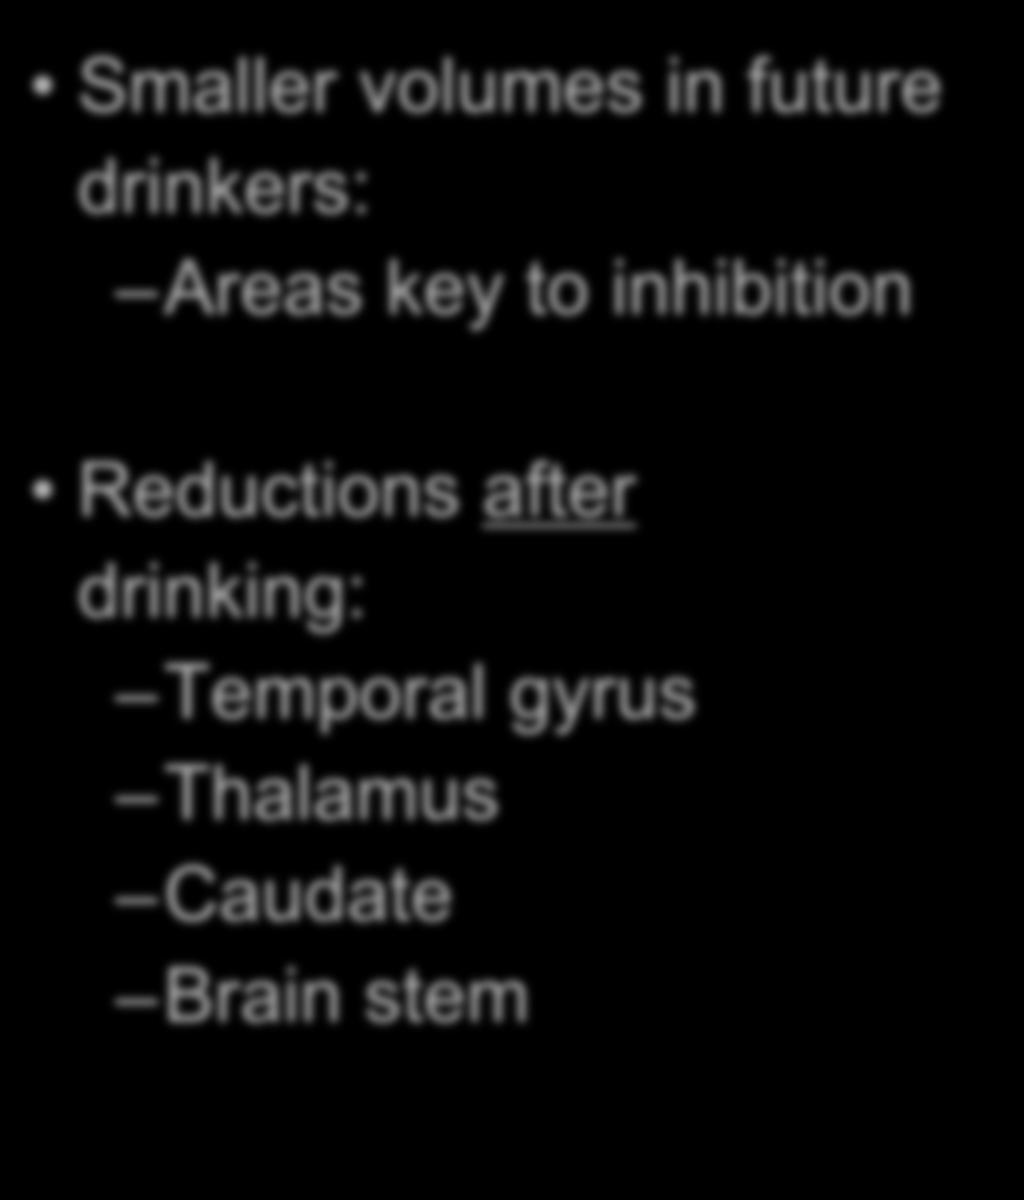 Volume Changes After Drinking Smaller volumes in future drinkers: Areas key to inhibition Reductions